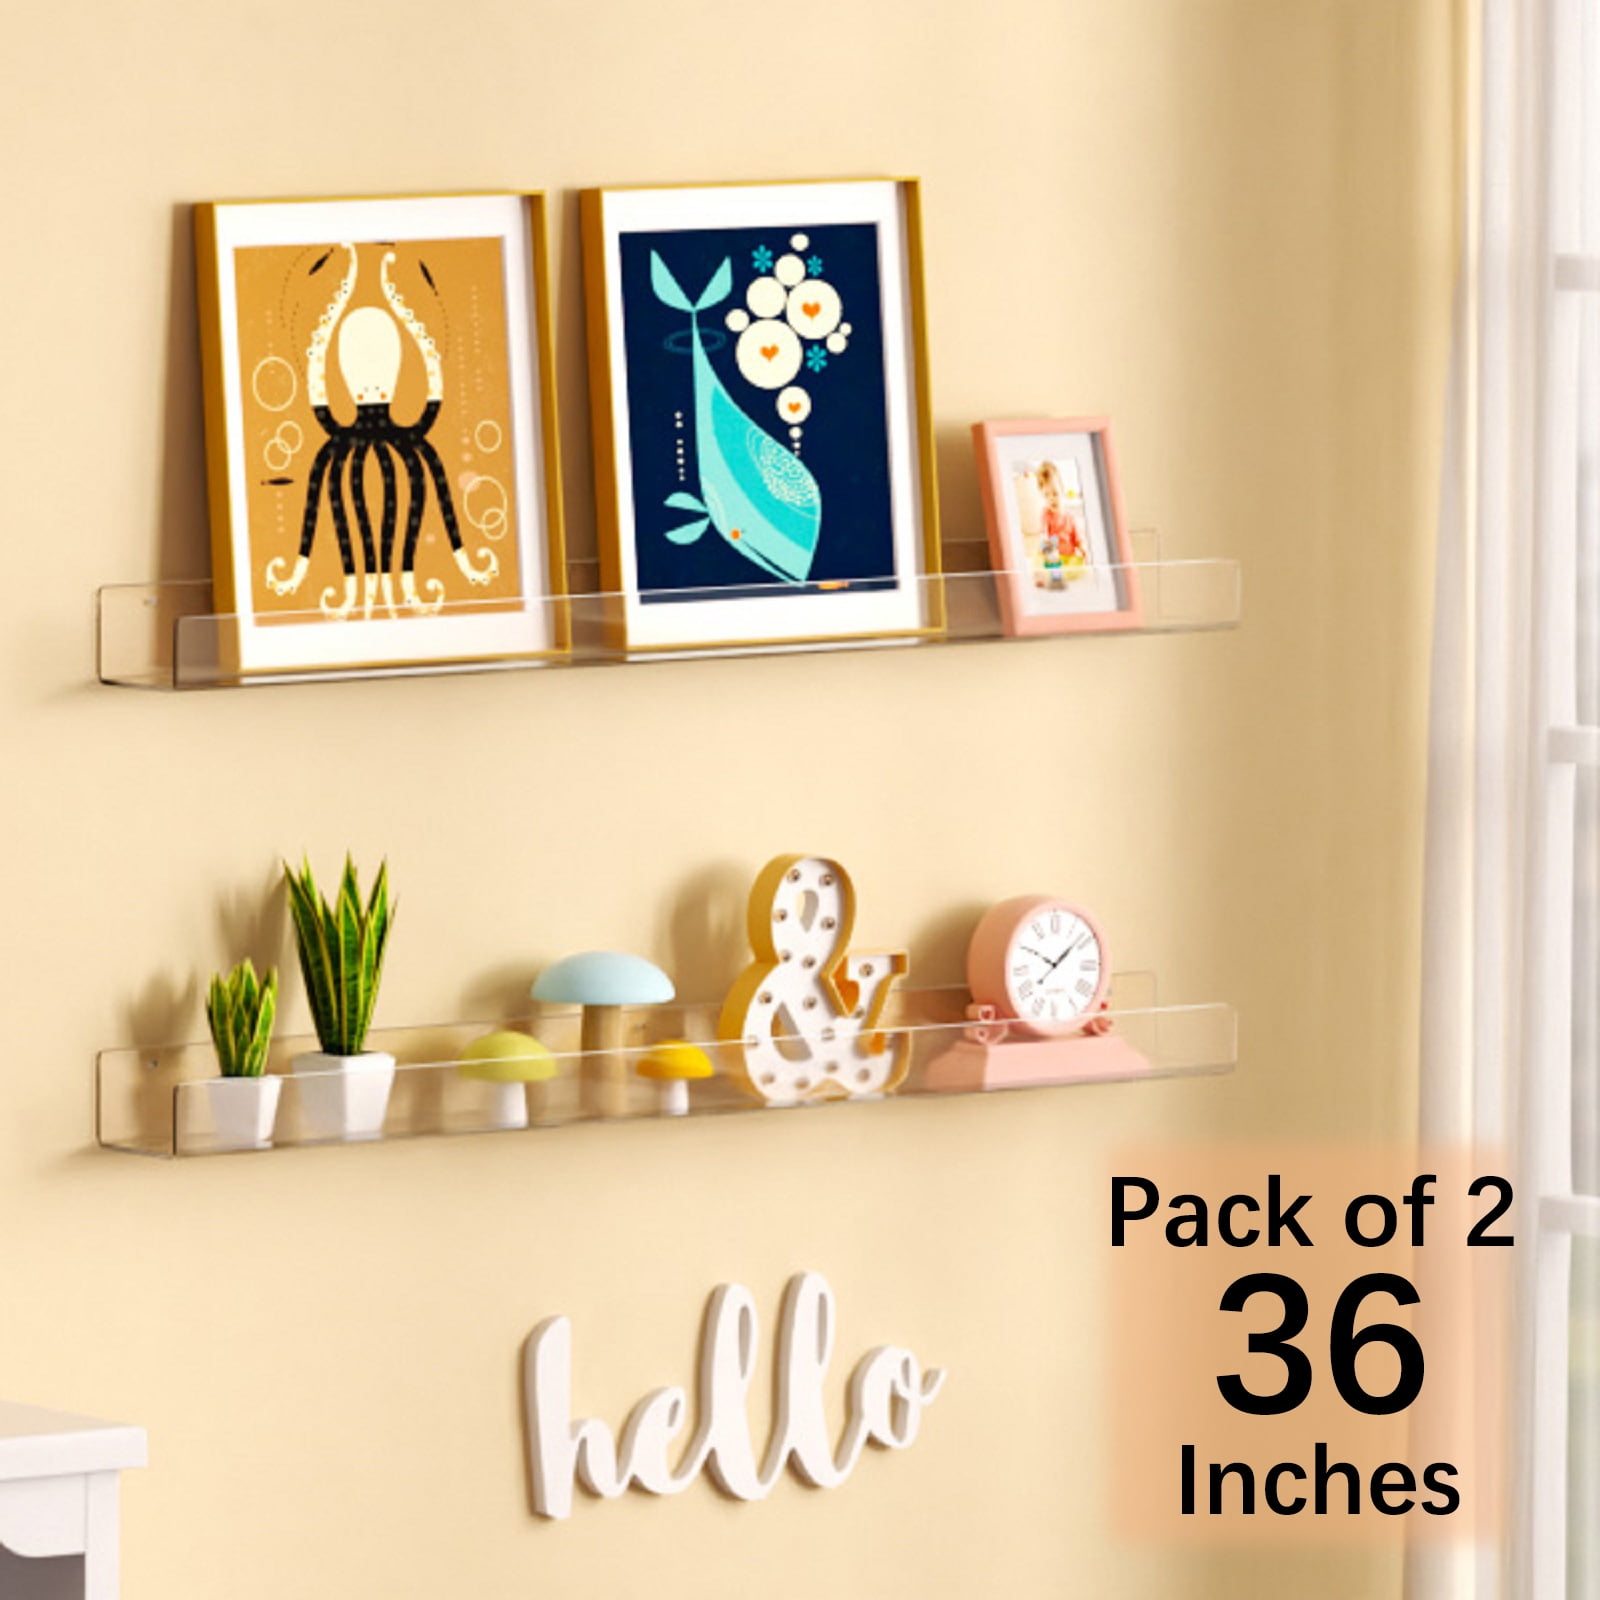 6 Pieces Small Adhesive Wall Shelves, 4 in Clear Floating Shelves Ledges